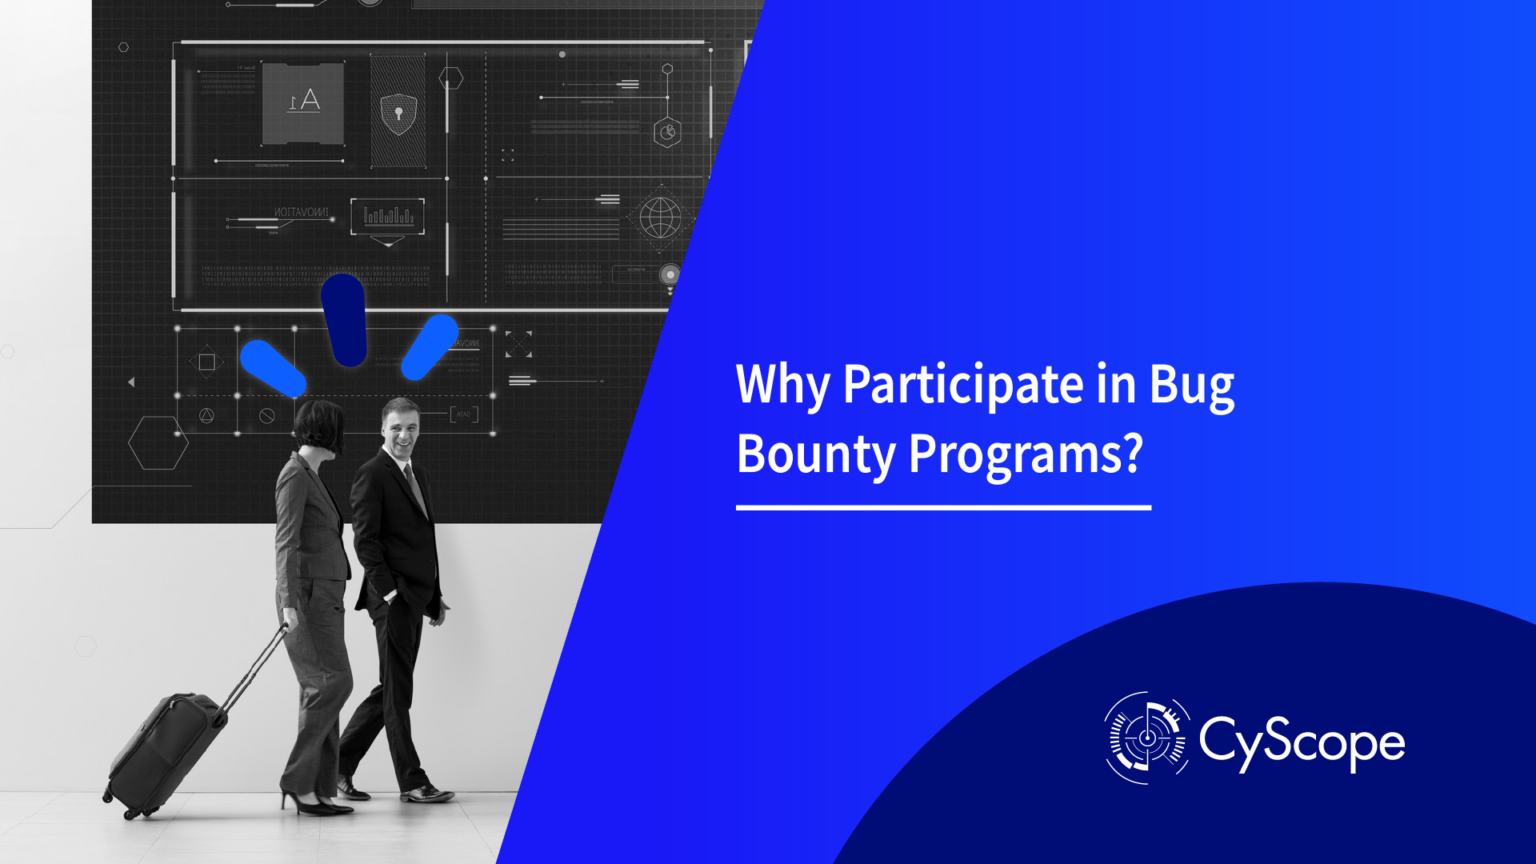 Why Participate in Bug Bounty Programs?